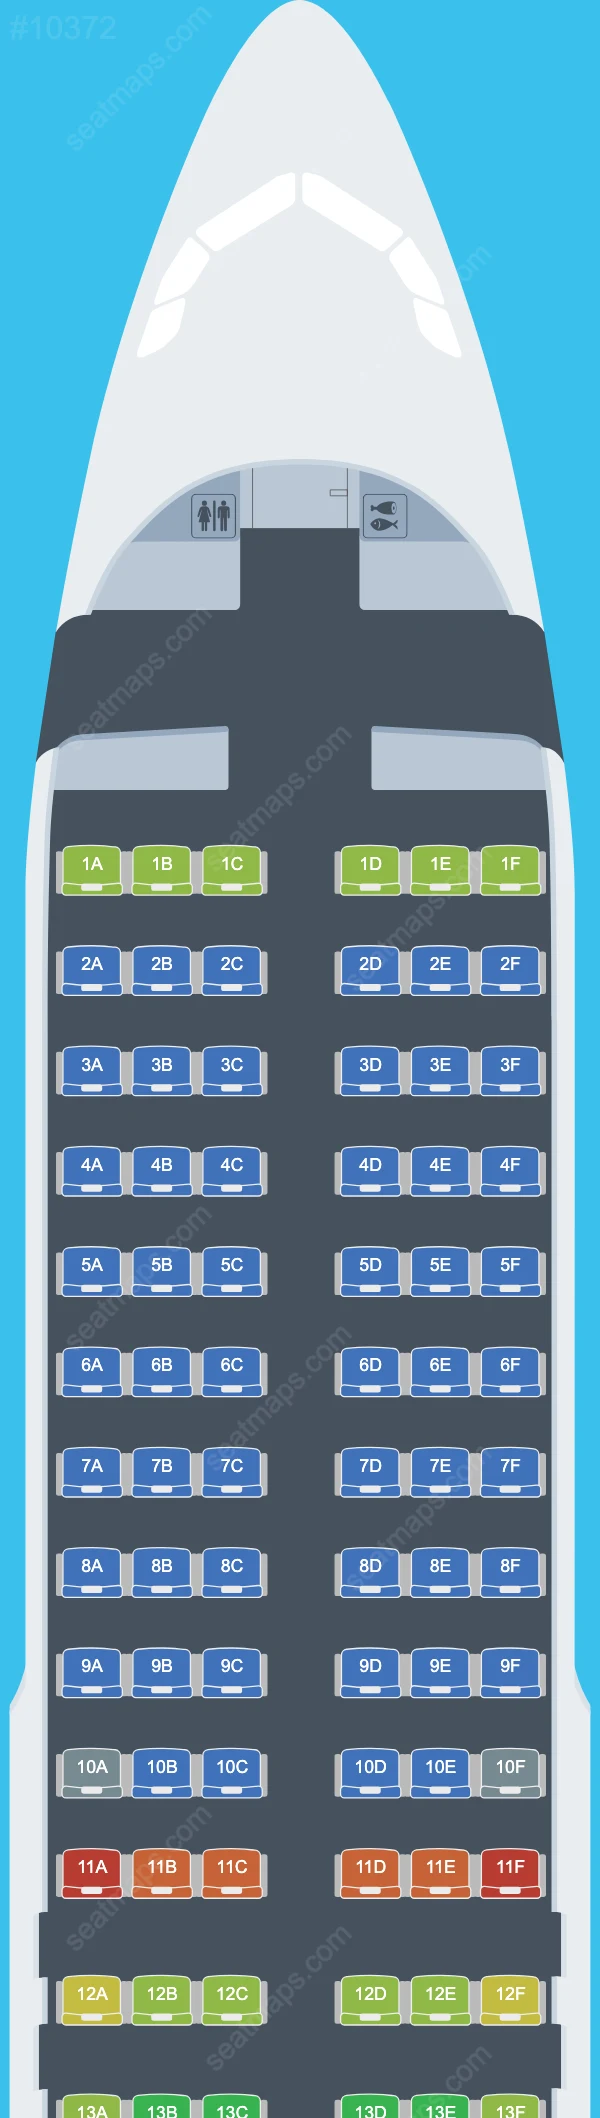 China Express Airlines Airbus A320neo aircraft seat map  A320neo